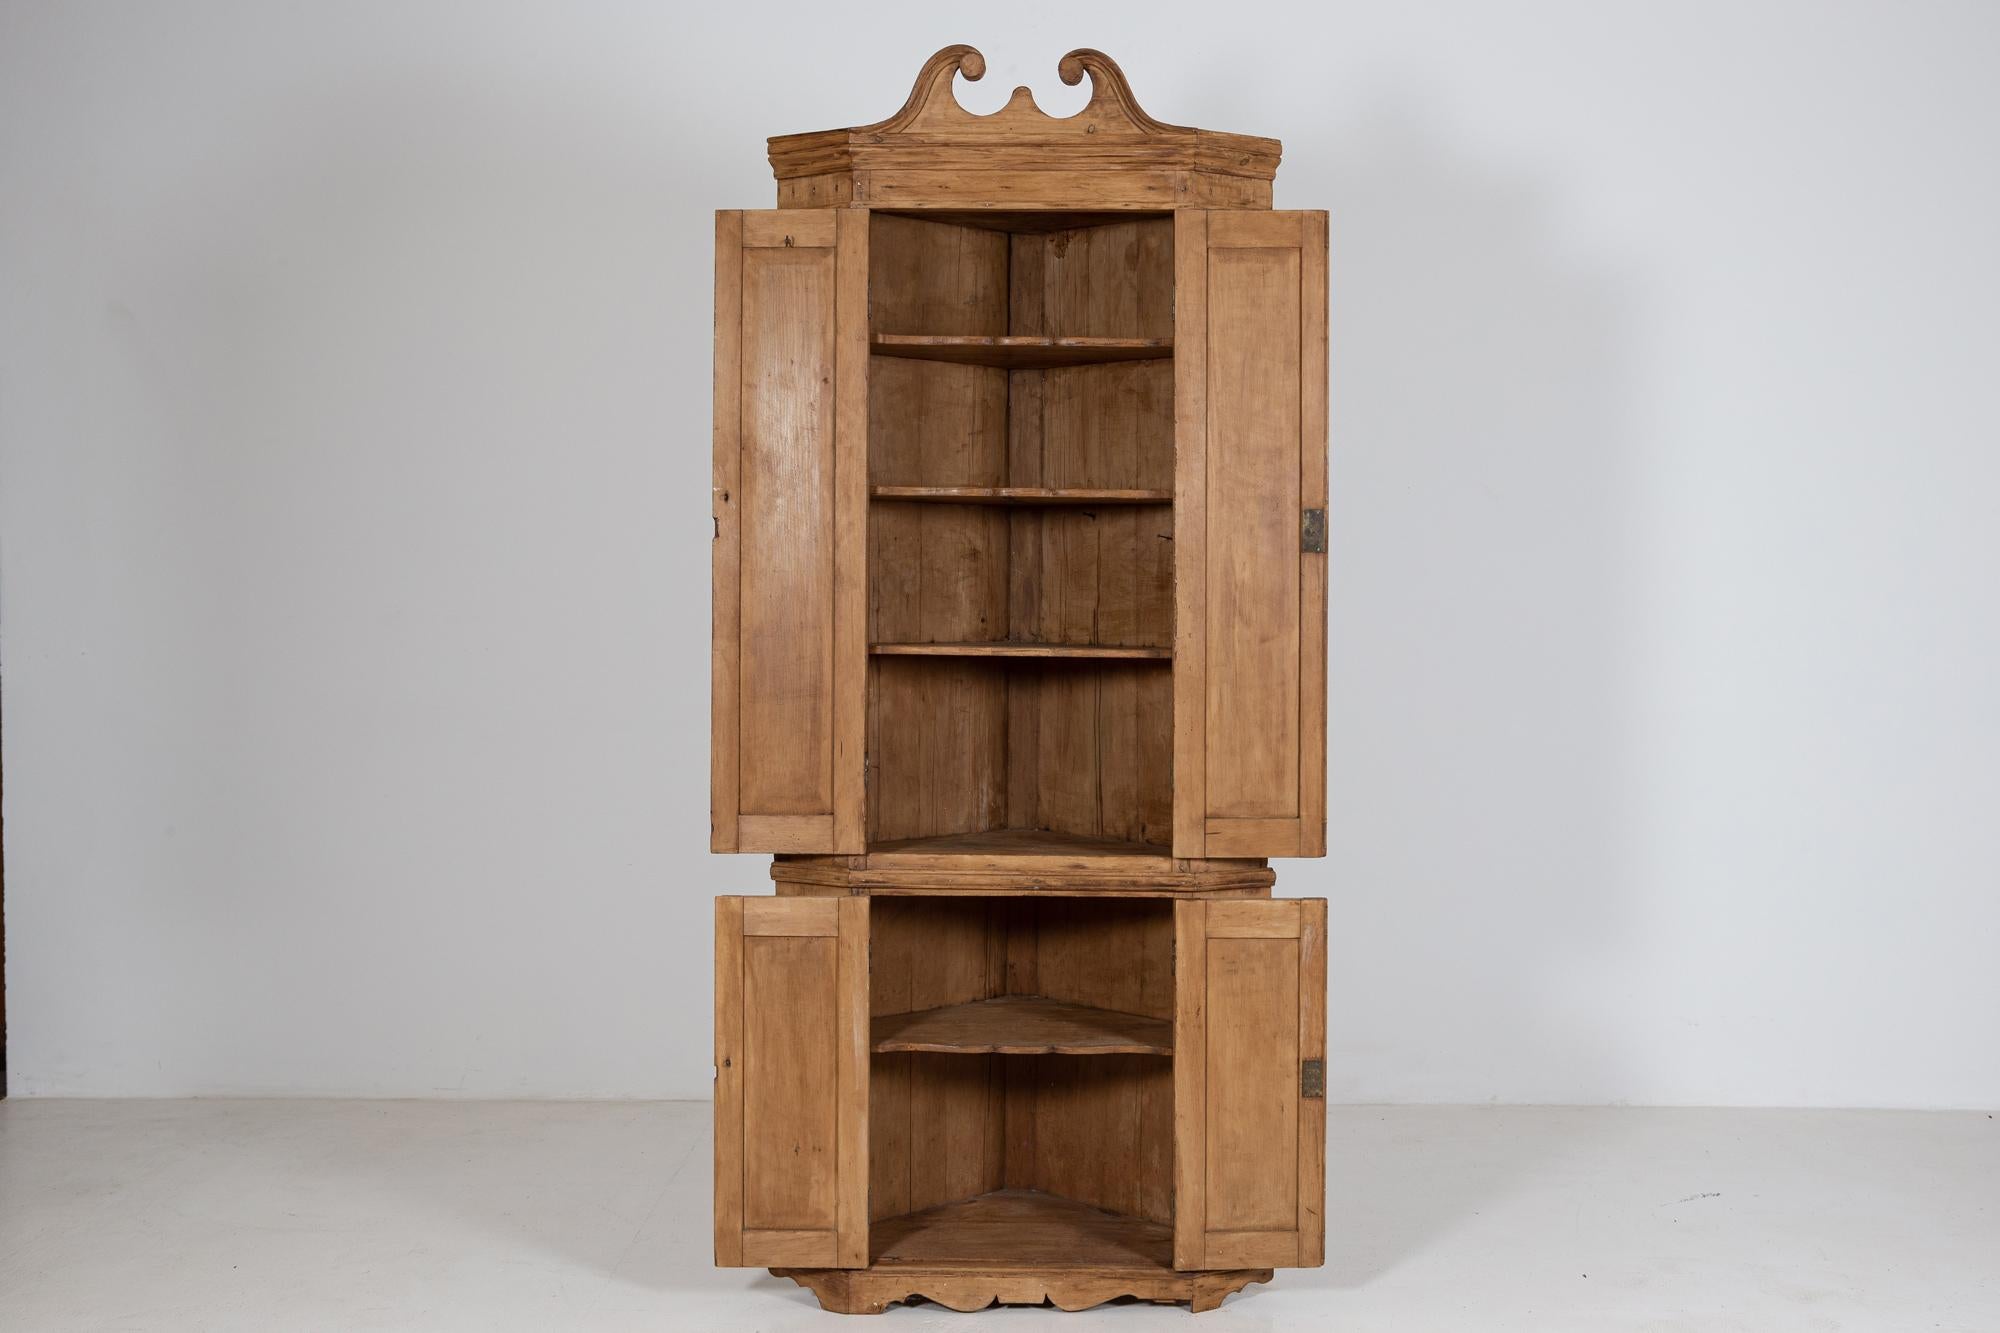 Circa 1770.

An English George III pine two tier corner cupboard with swan neck pediment, fitted four shaped shelves enclosed by two pairs of panelled doors



Measures: W90 x D62 x H220.